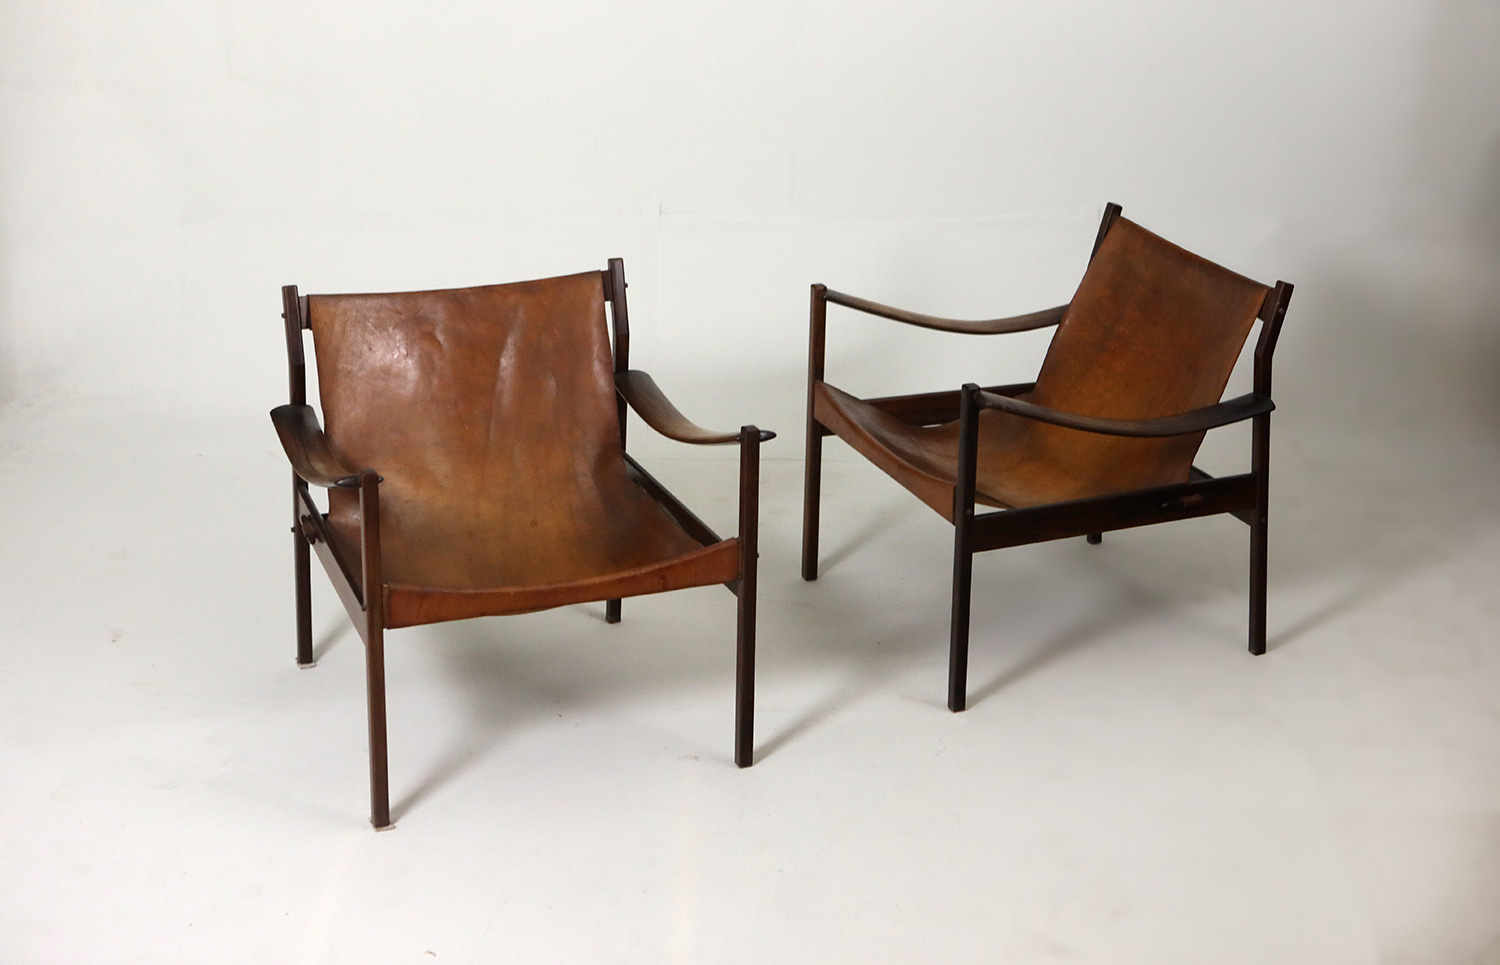 Pair of Model 720 Armchairs, 1960s by Jorge Zalszupin at Mercado Moderno